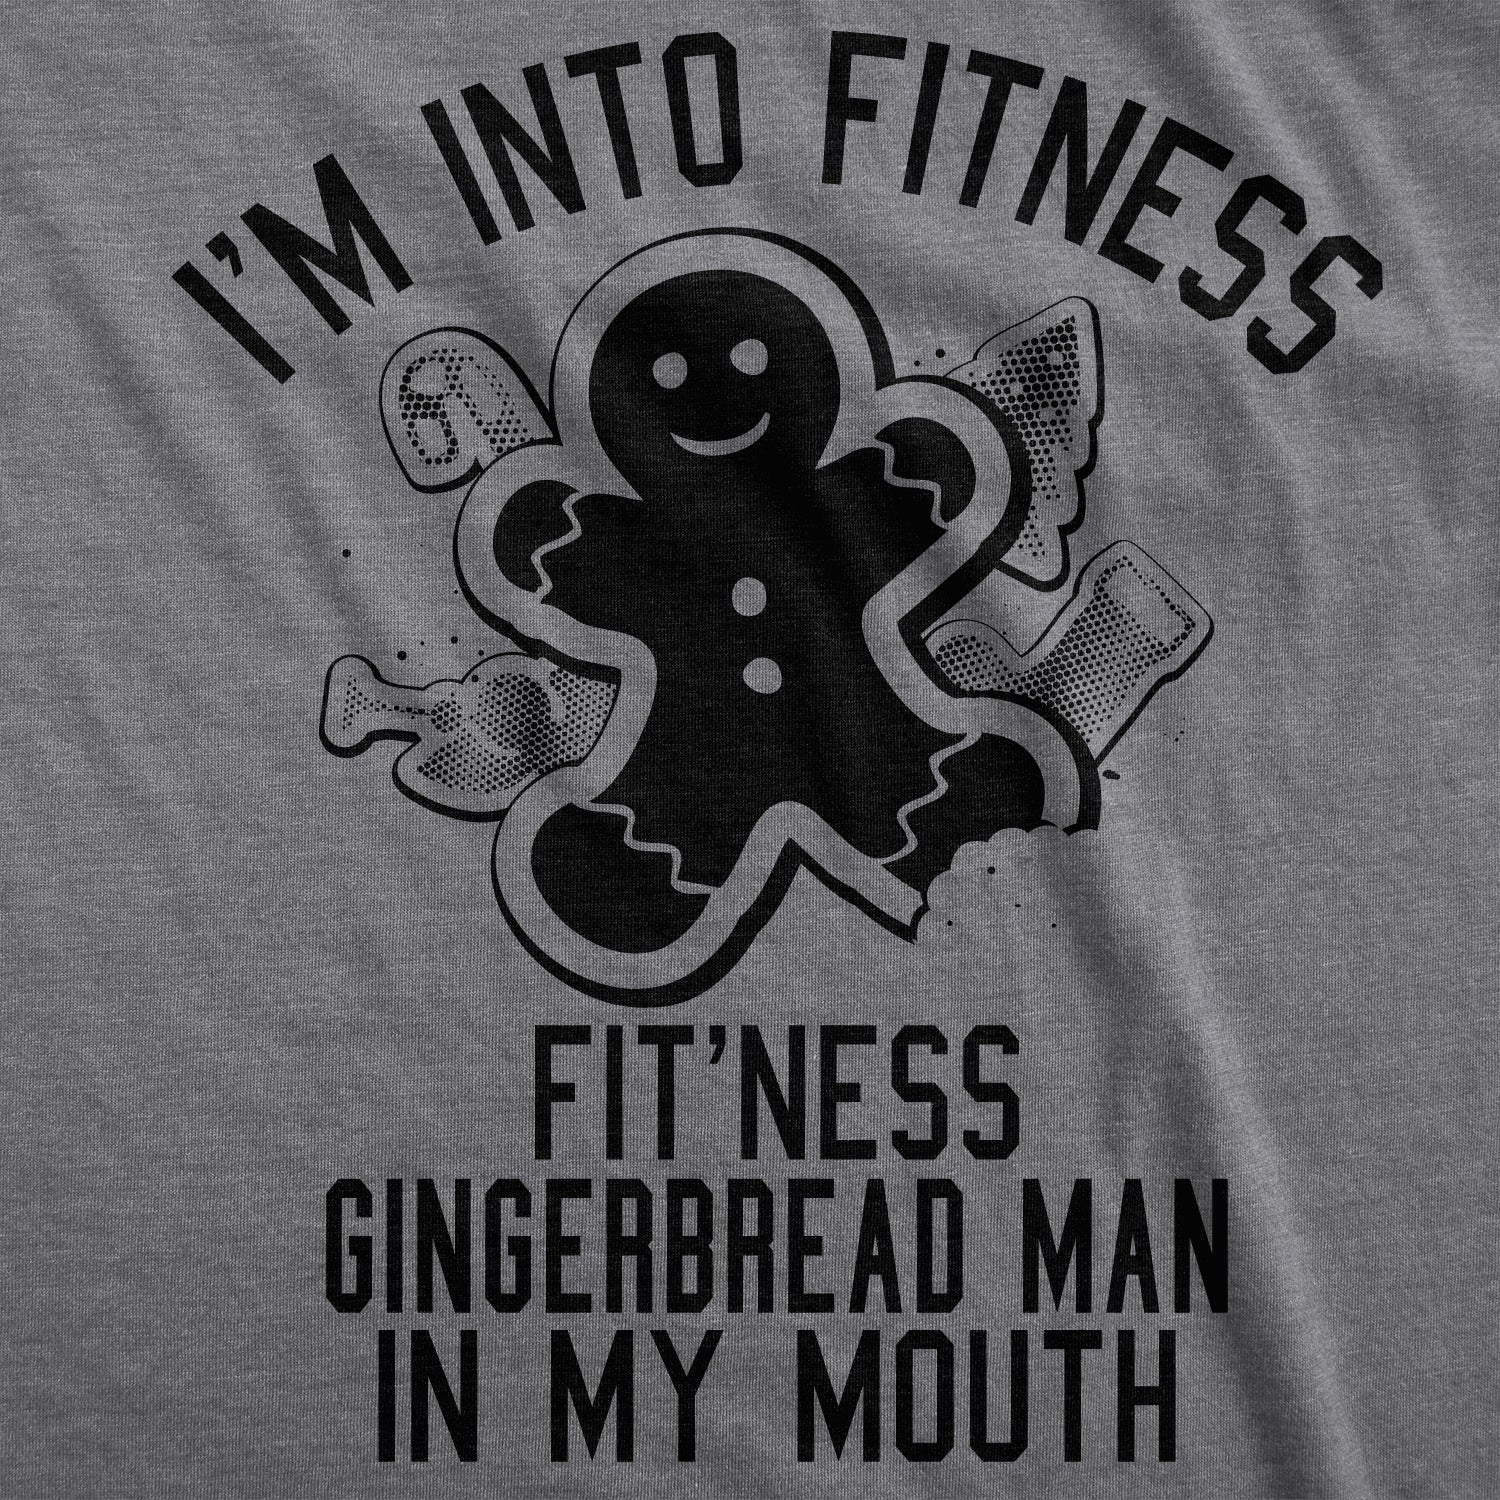 Funny Dark Heather Grey Fitness Gingerbread In My Mouth Mens T Shirt Nerdy Christmas Fitness Food Tee